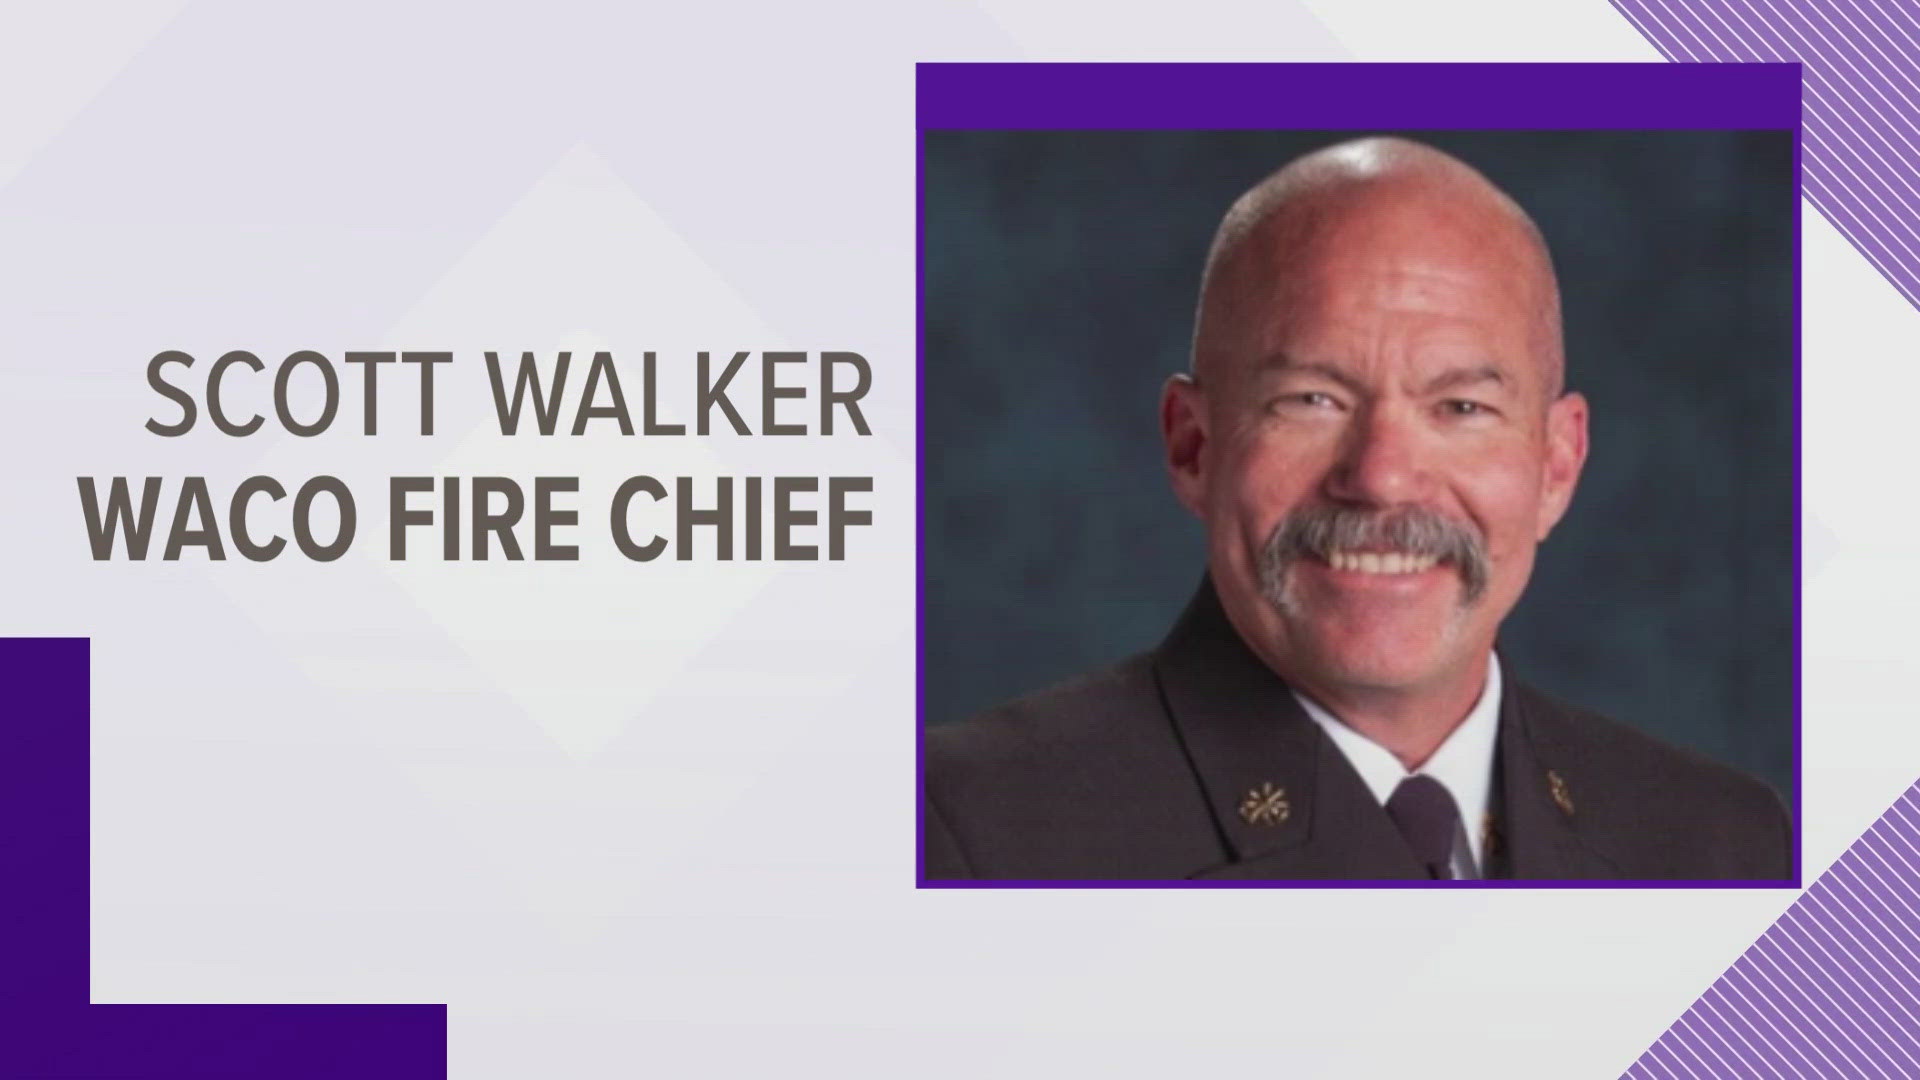 Scott Walker, the selected candidate for the position, began his career with the Phoenix Fire Department in 1994.